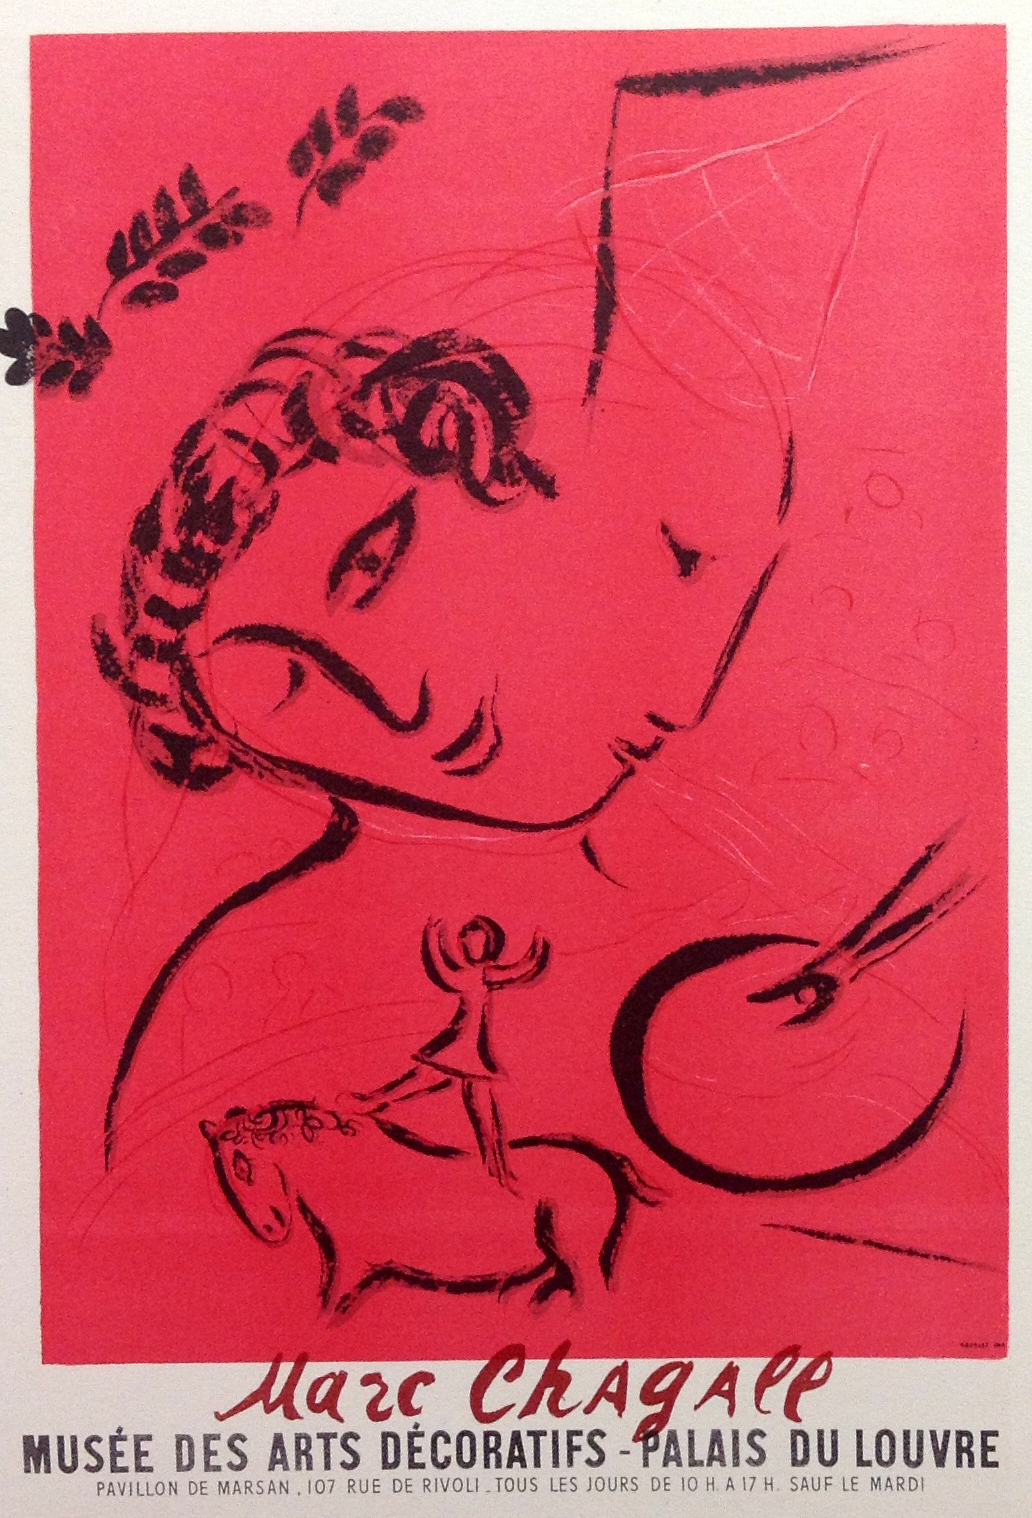 Chagall Lithograph 99, Palais de louvre 1959 Art in posters